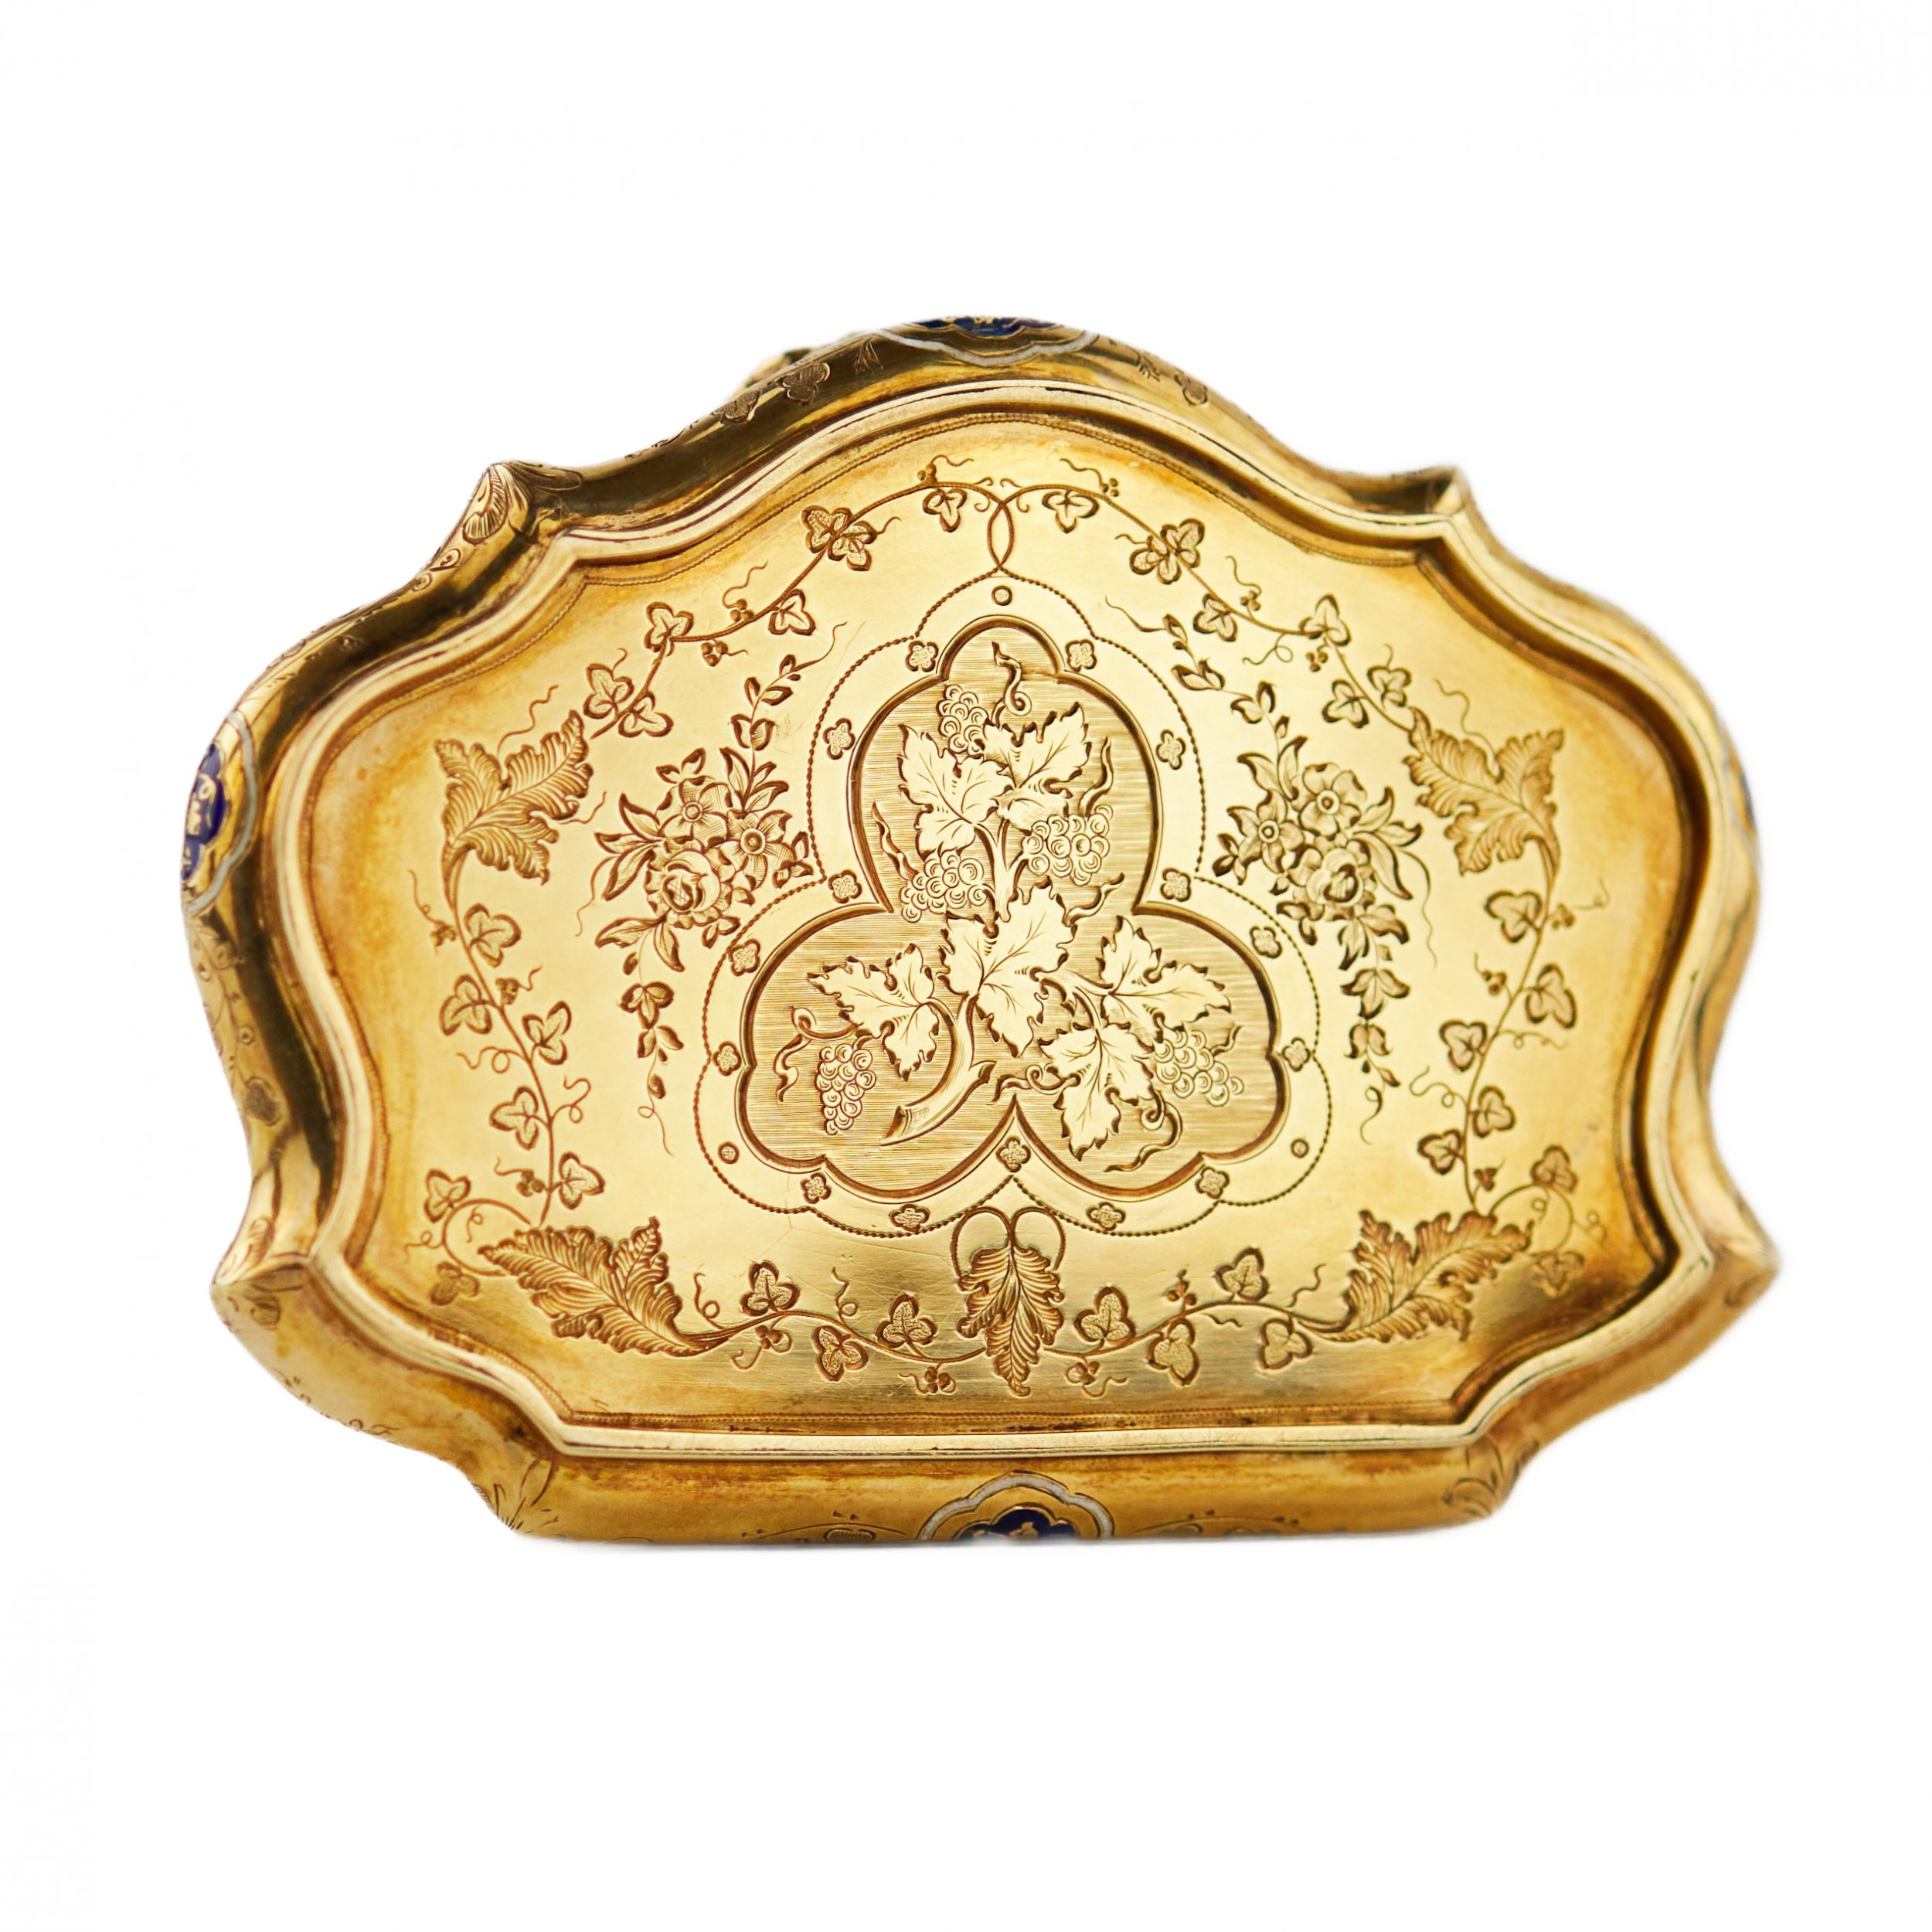 Gold snuff box with engraved ornament and blue enamel. 20th century. - Image 8 of 10